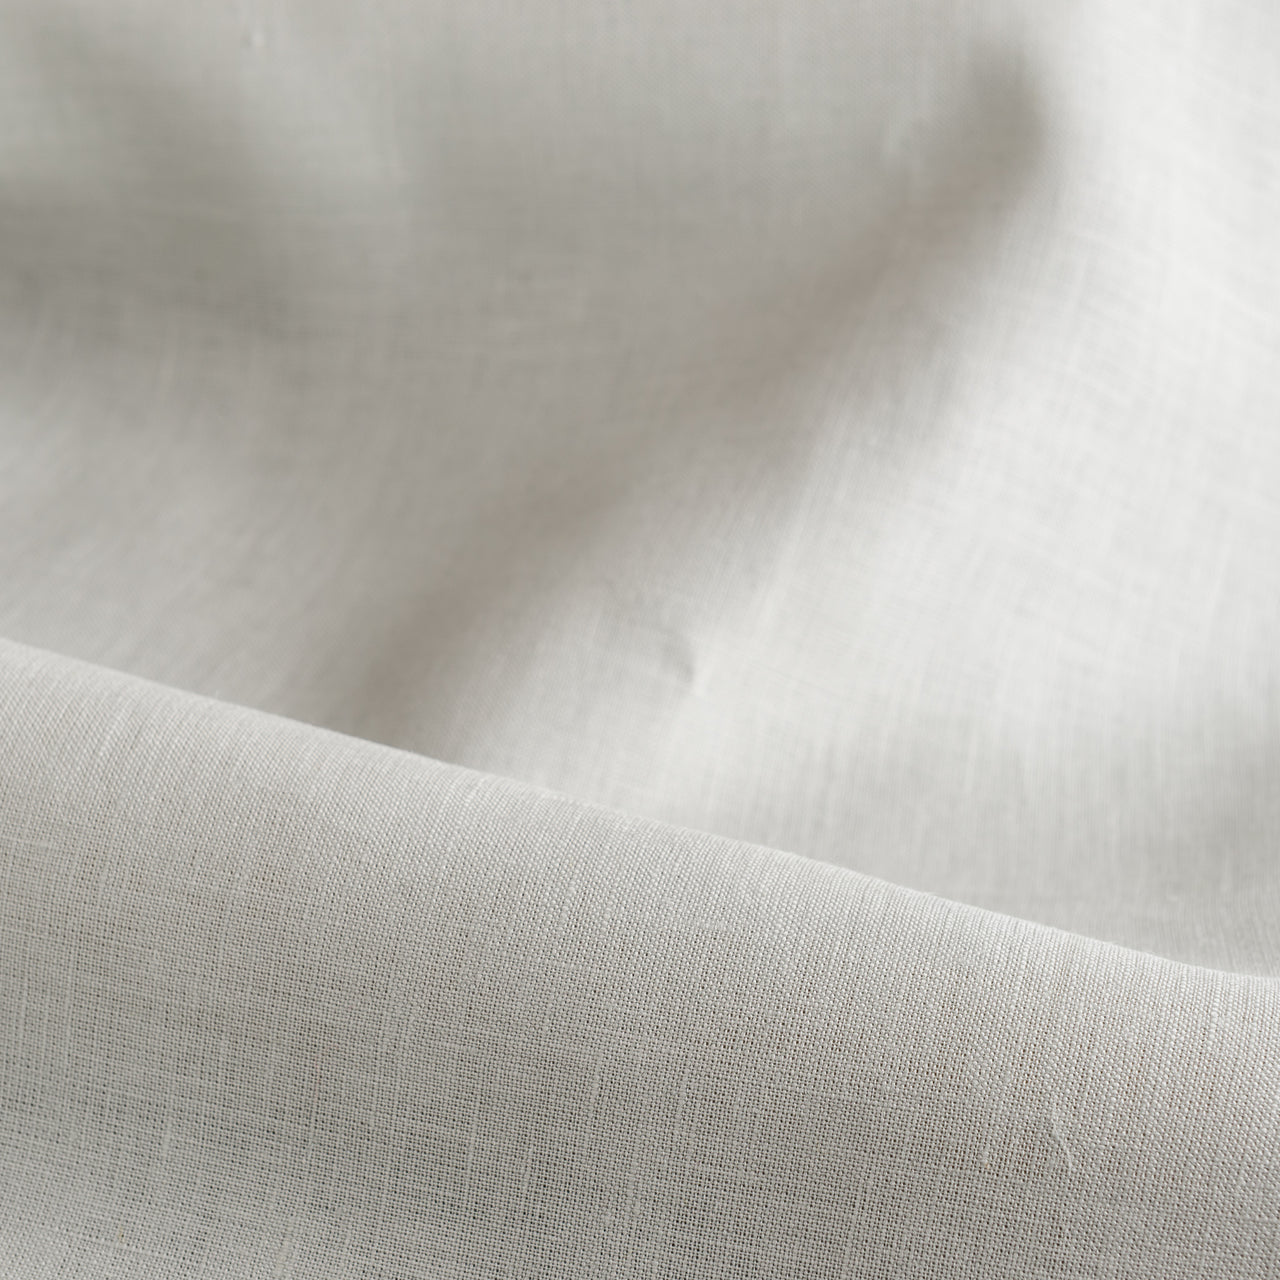 Stone Grey Linen Fabric by the Meter - 100% French Natural - Width 133 cm, 267 cm